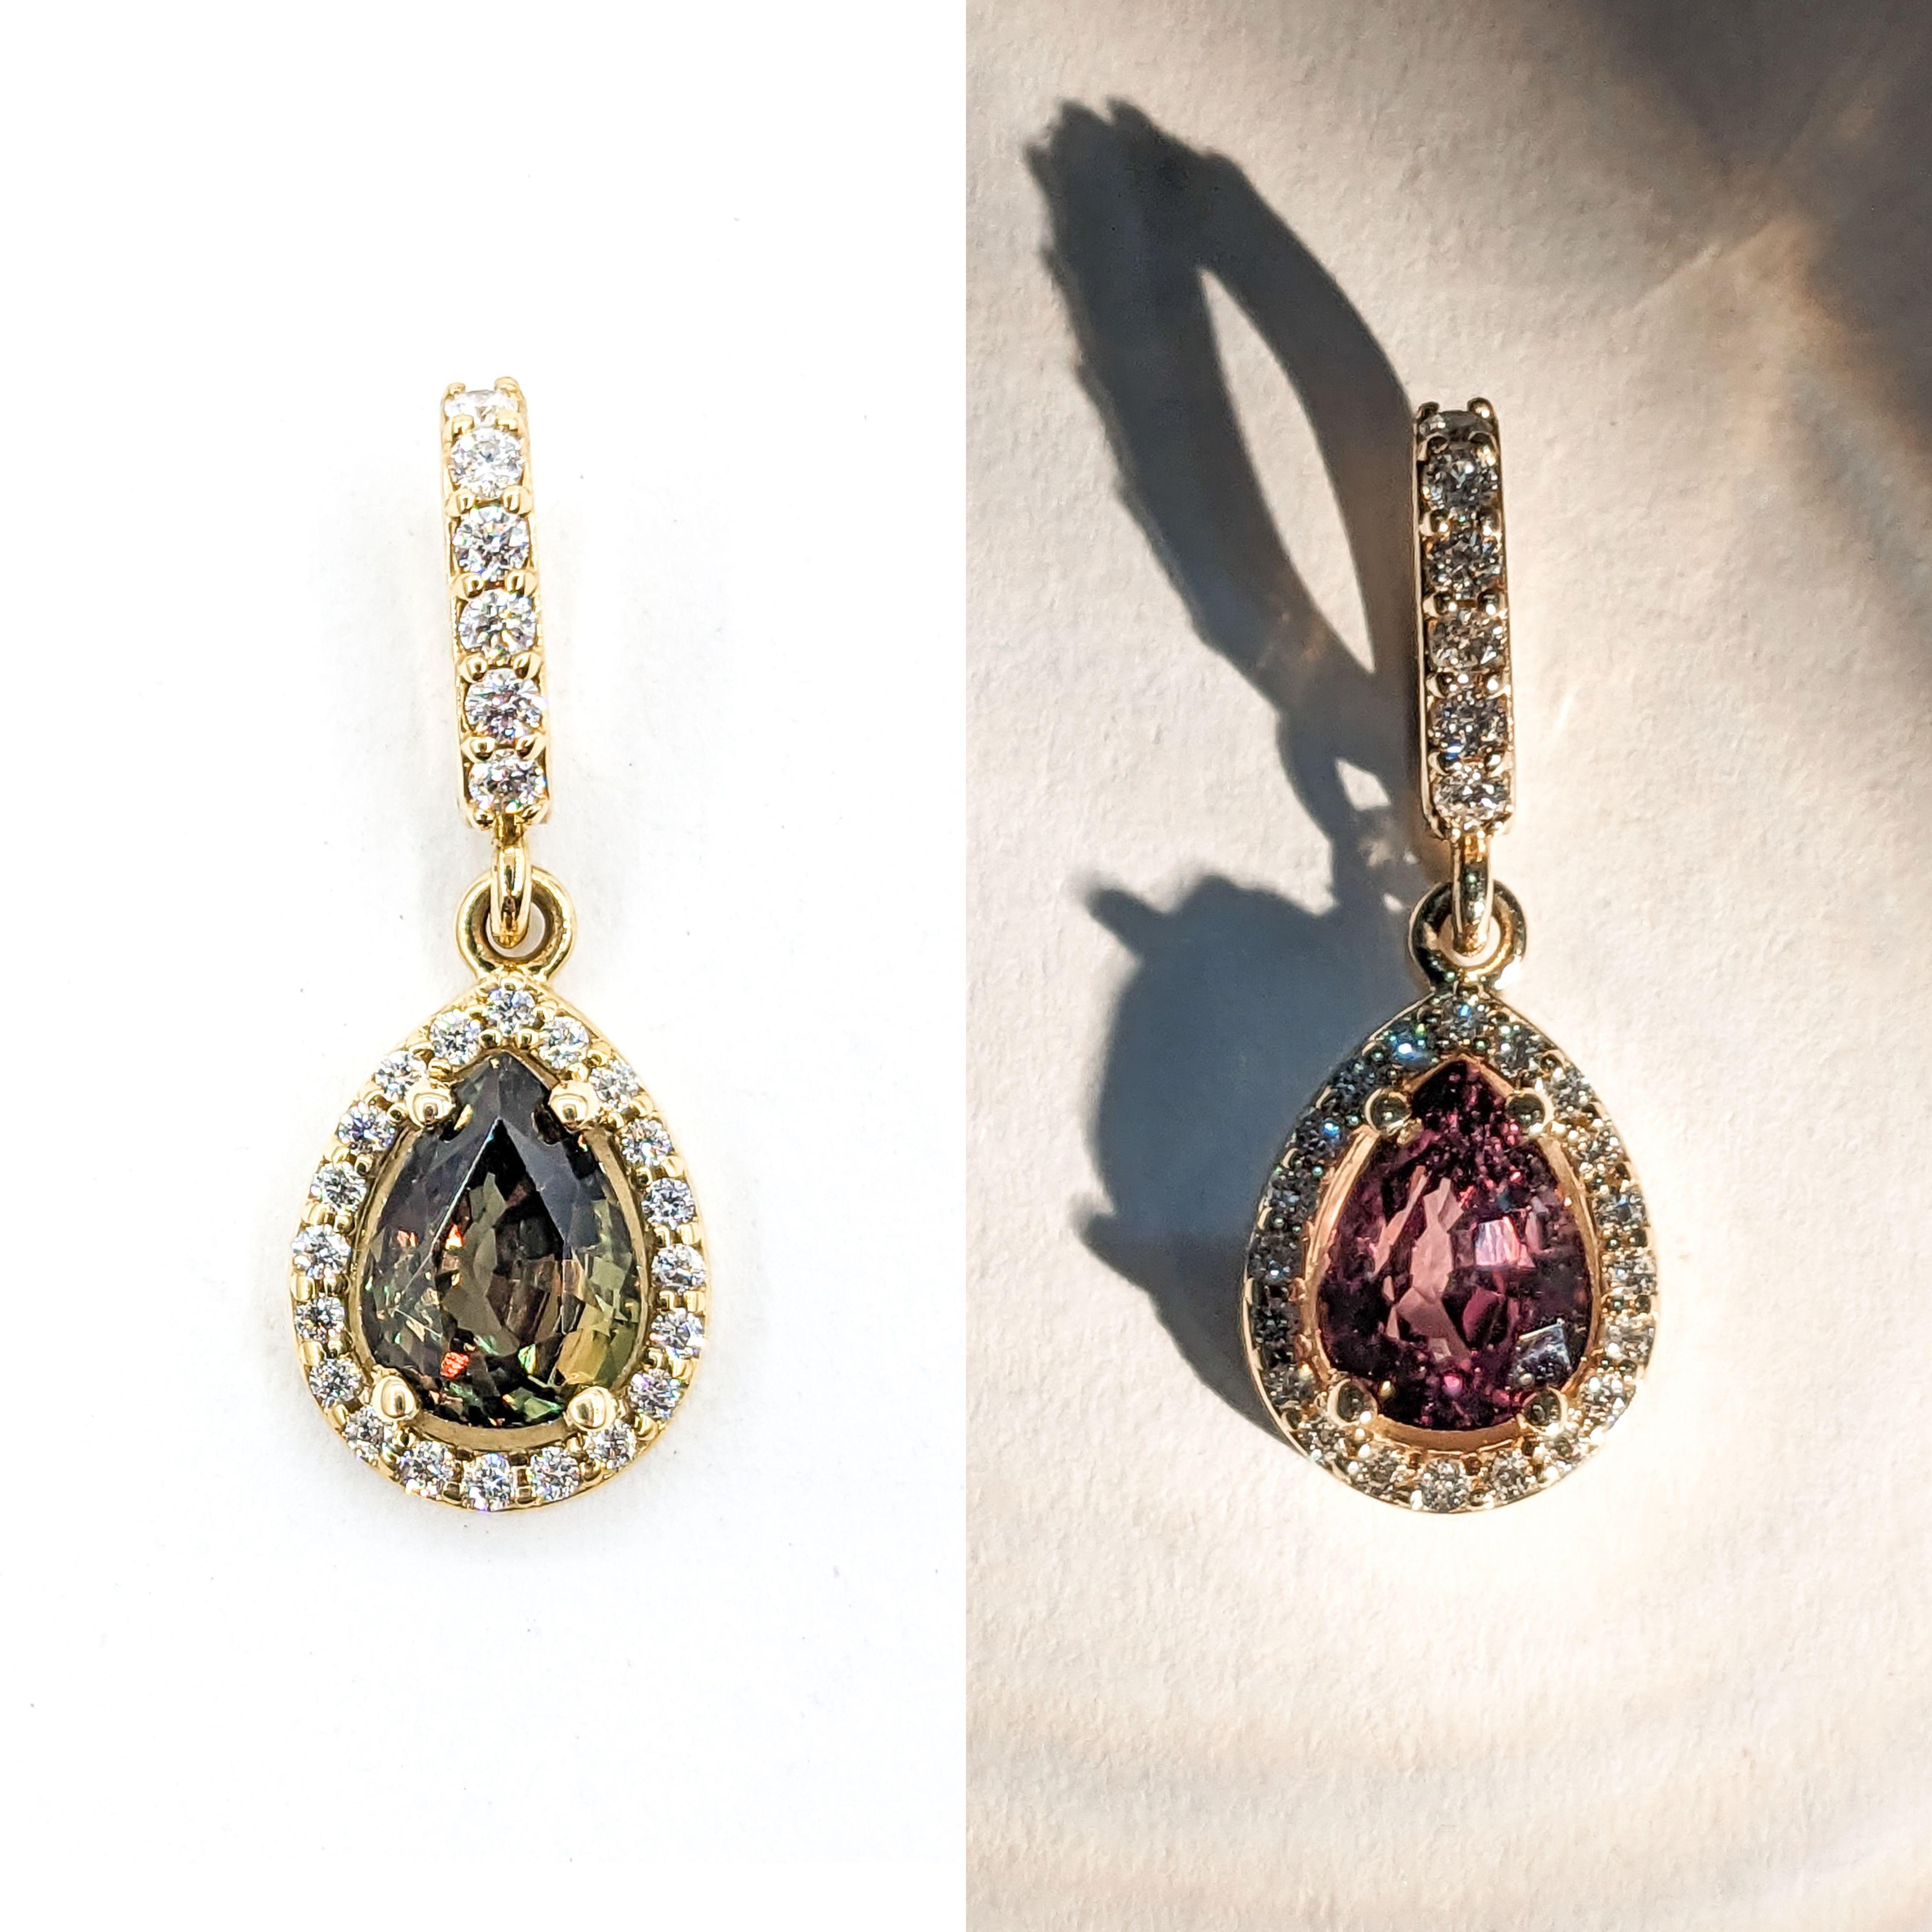 Stunning Alexandrite & Diamond Yellow Gold Pendant

Discover the exquisite beauty of our latest creation, mesmerizing Alexandrite & Diamond Pendant meticulously crafted in 14kt yellow gold. Experience the magic of color transformation as the .99ct